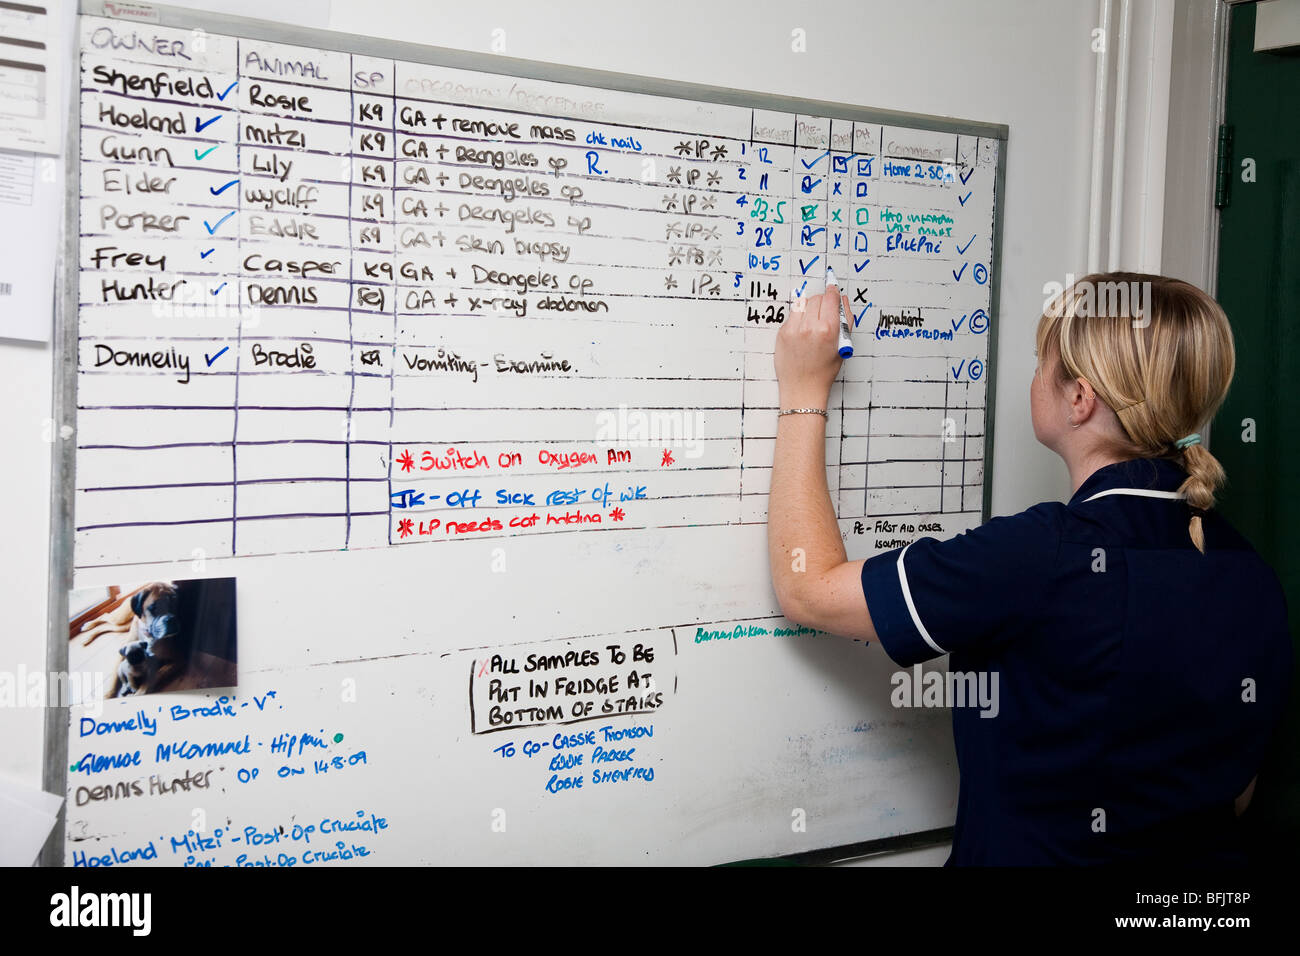 Veterinary Nurse Updates the Operations Board in a Veterinary Practice Stock Photo